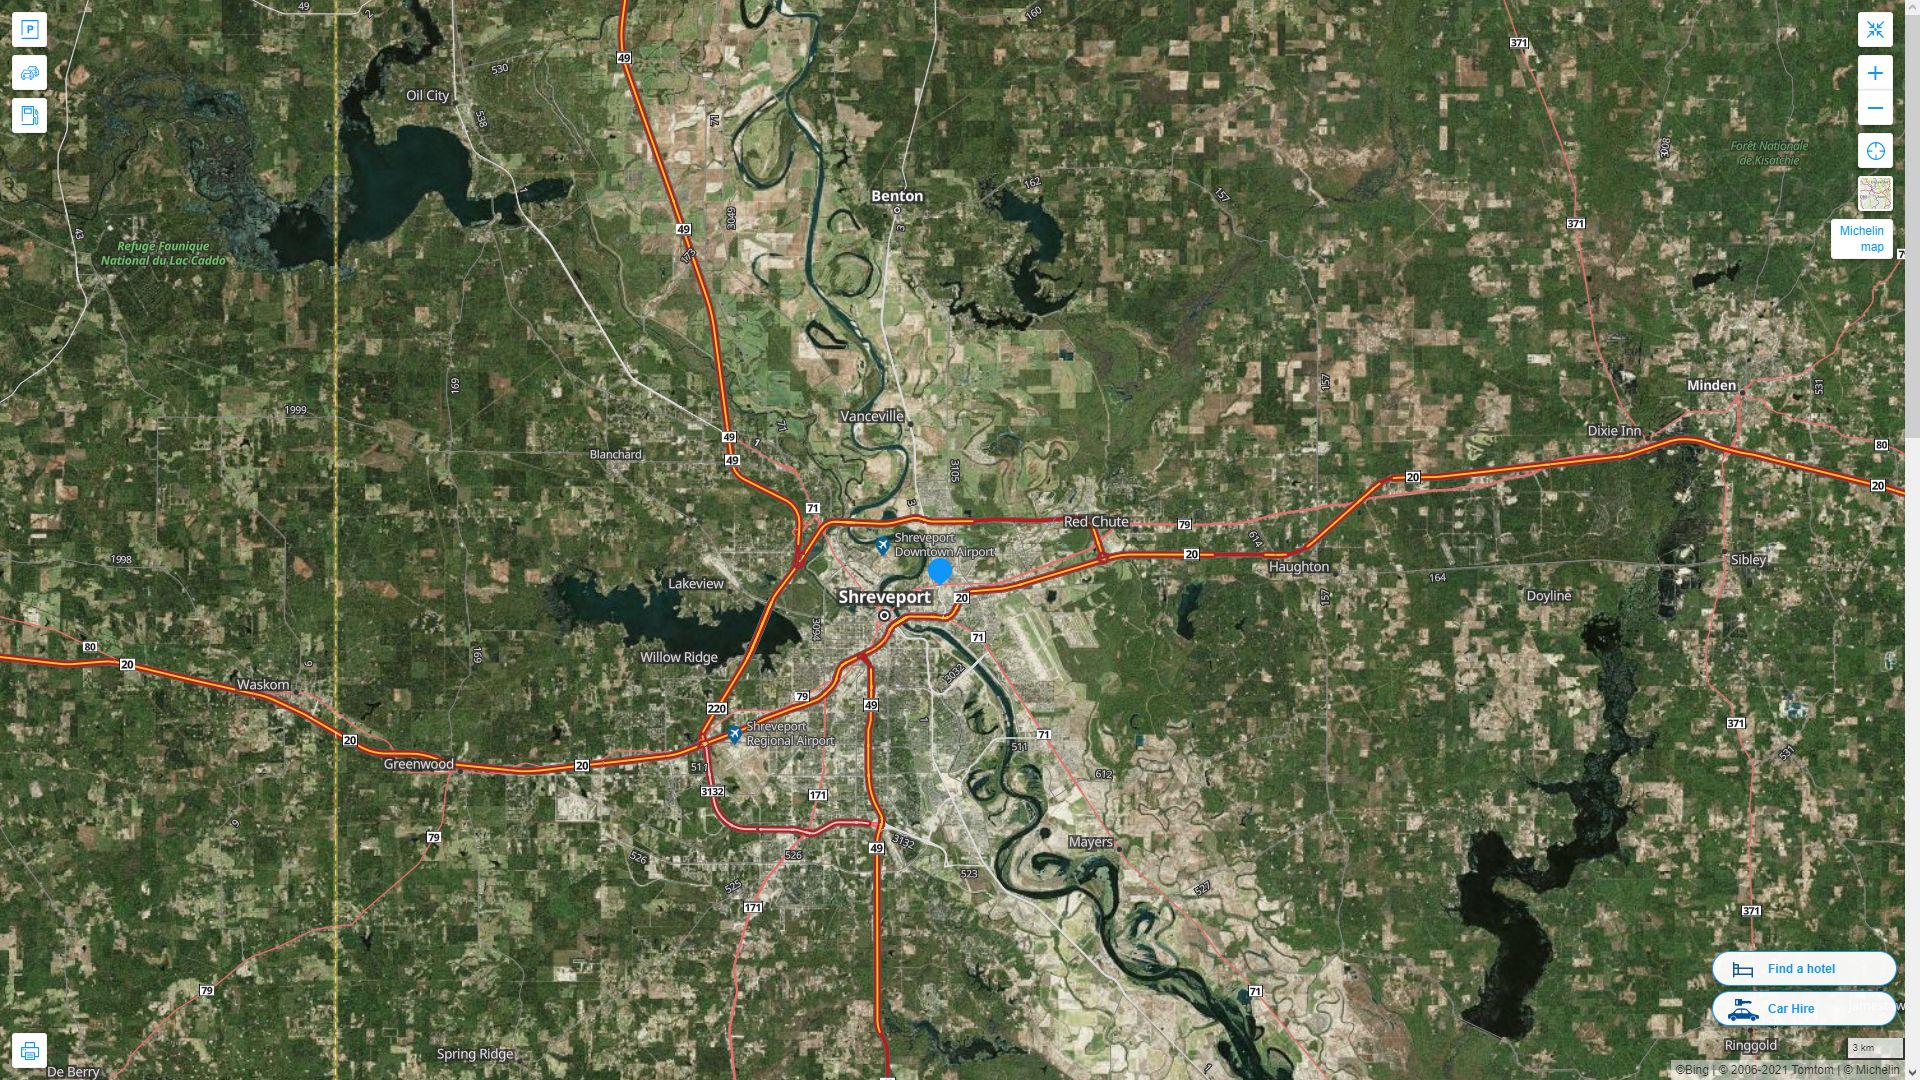 Bossier City Louisiana Highway and Road Map with Satellite View